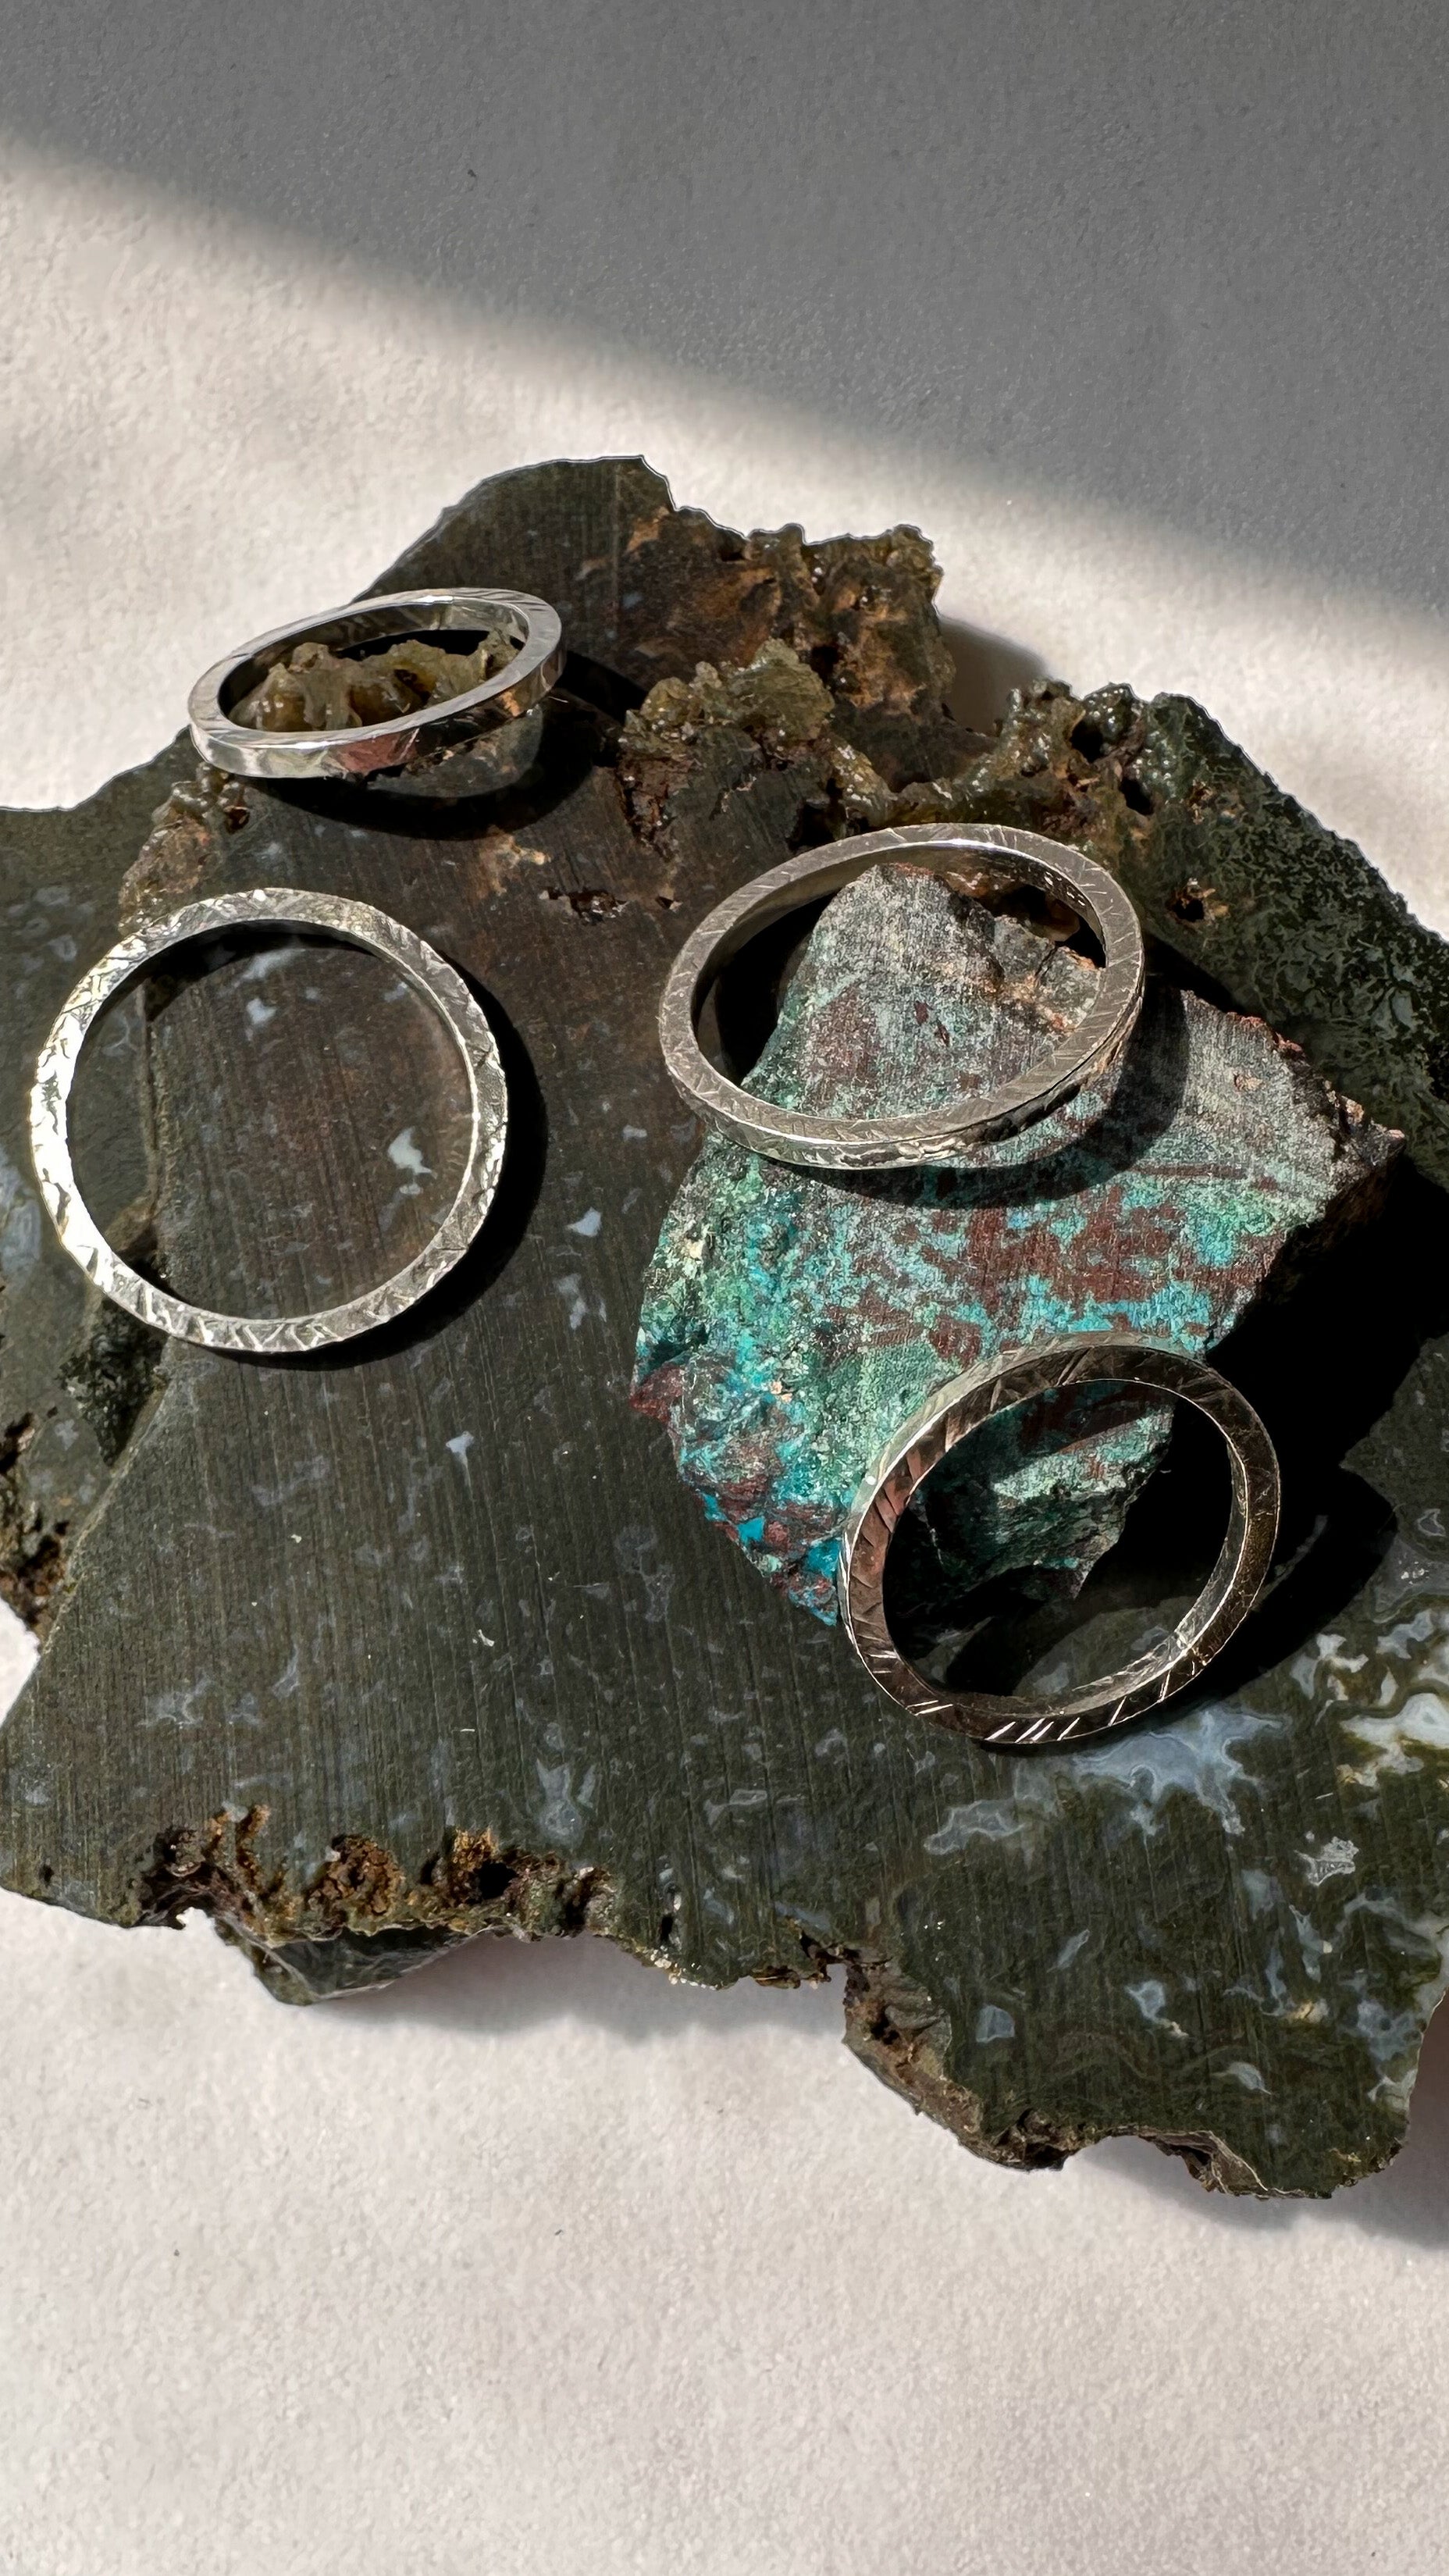 Four silver rings with hammered texture. They are arranged on two green slabs of moss agate and a small chunk of chrysocolla.